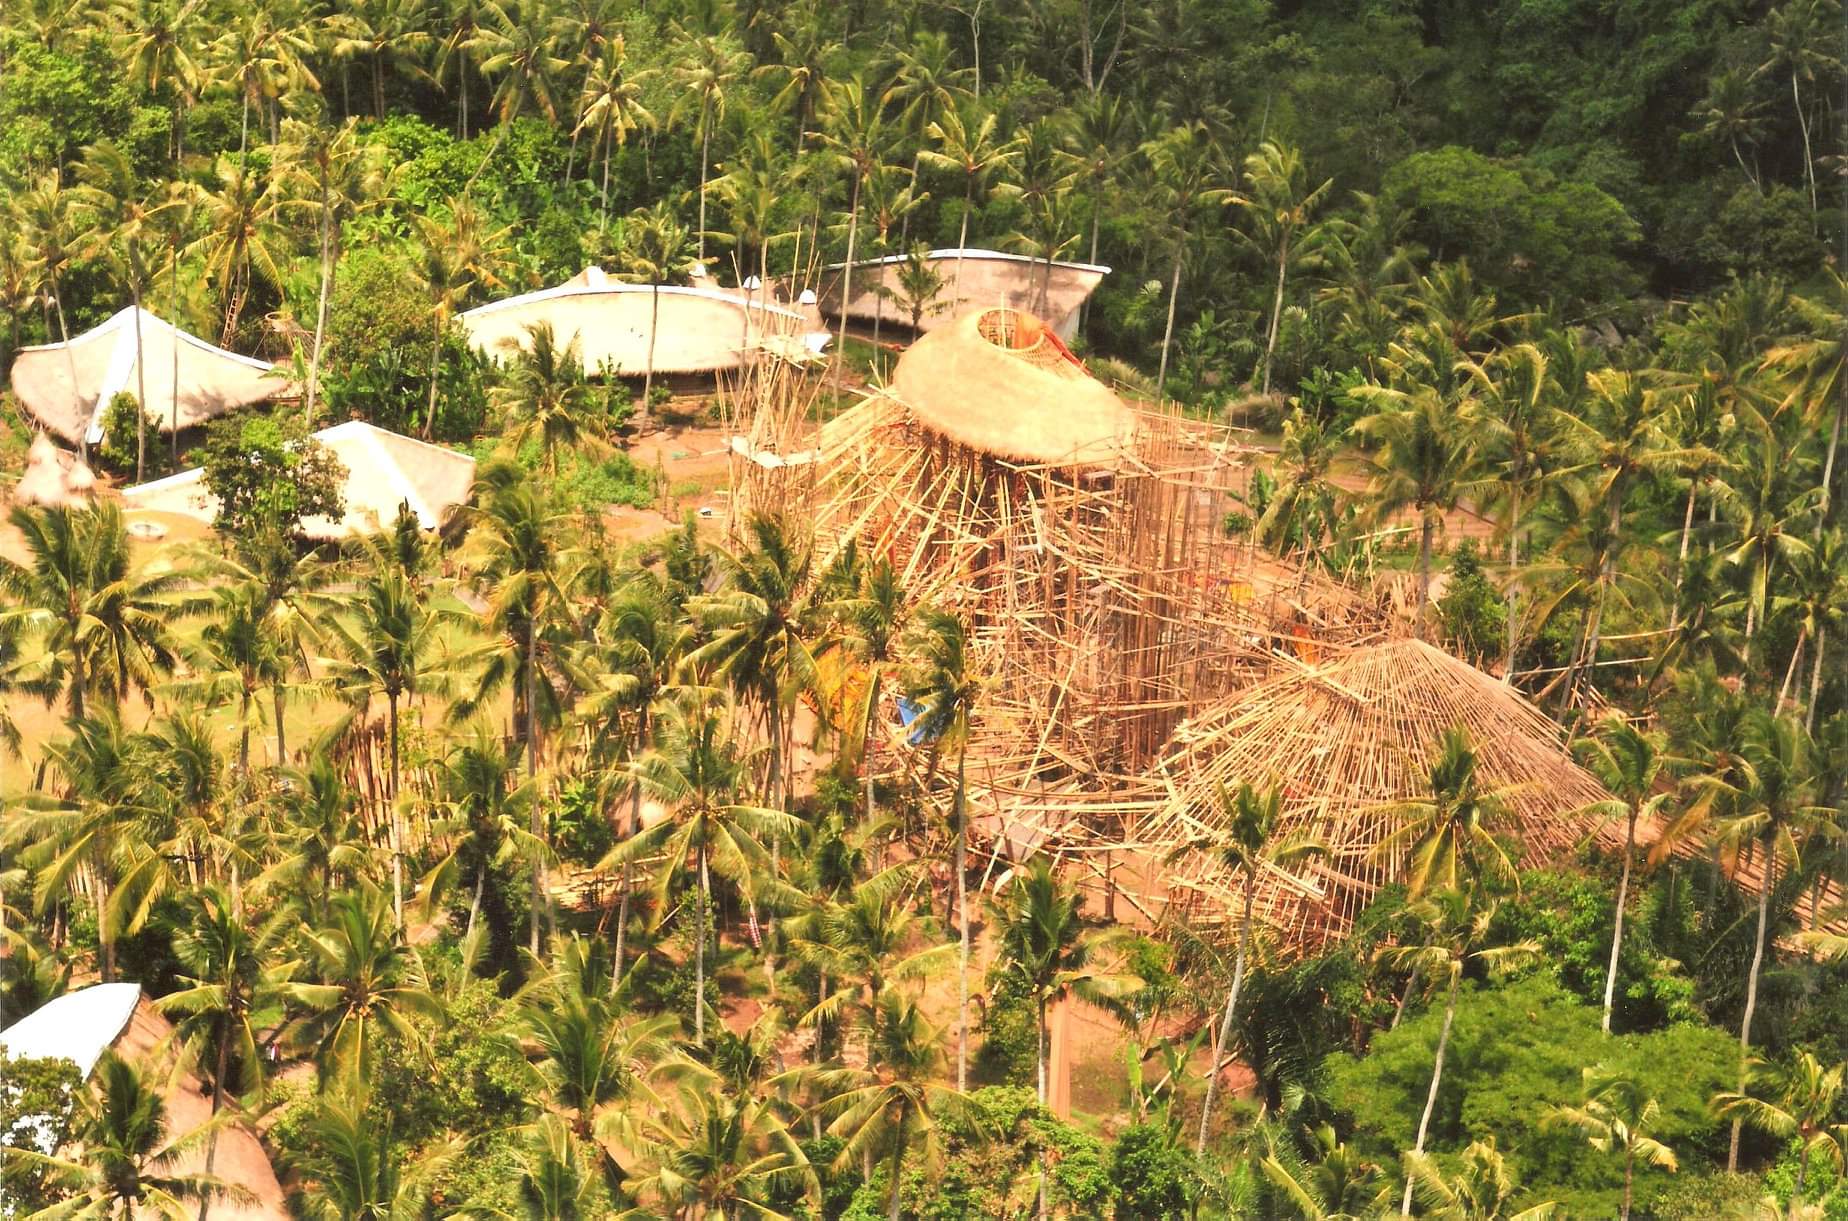 The whole structure was constructed entirely from bamboo within six months.